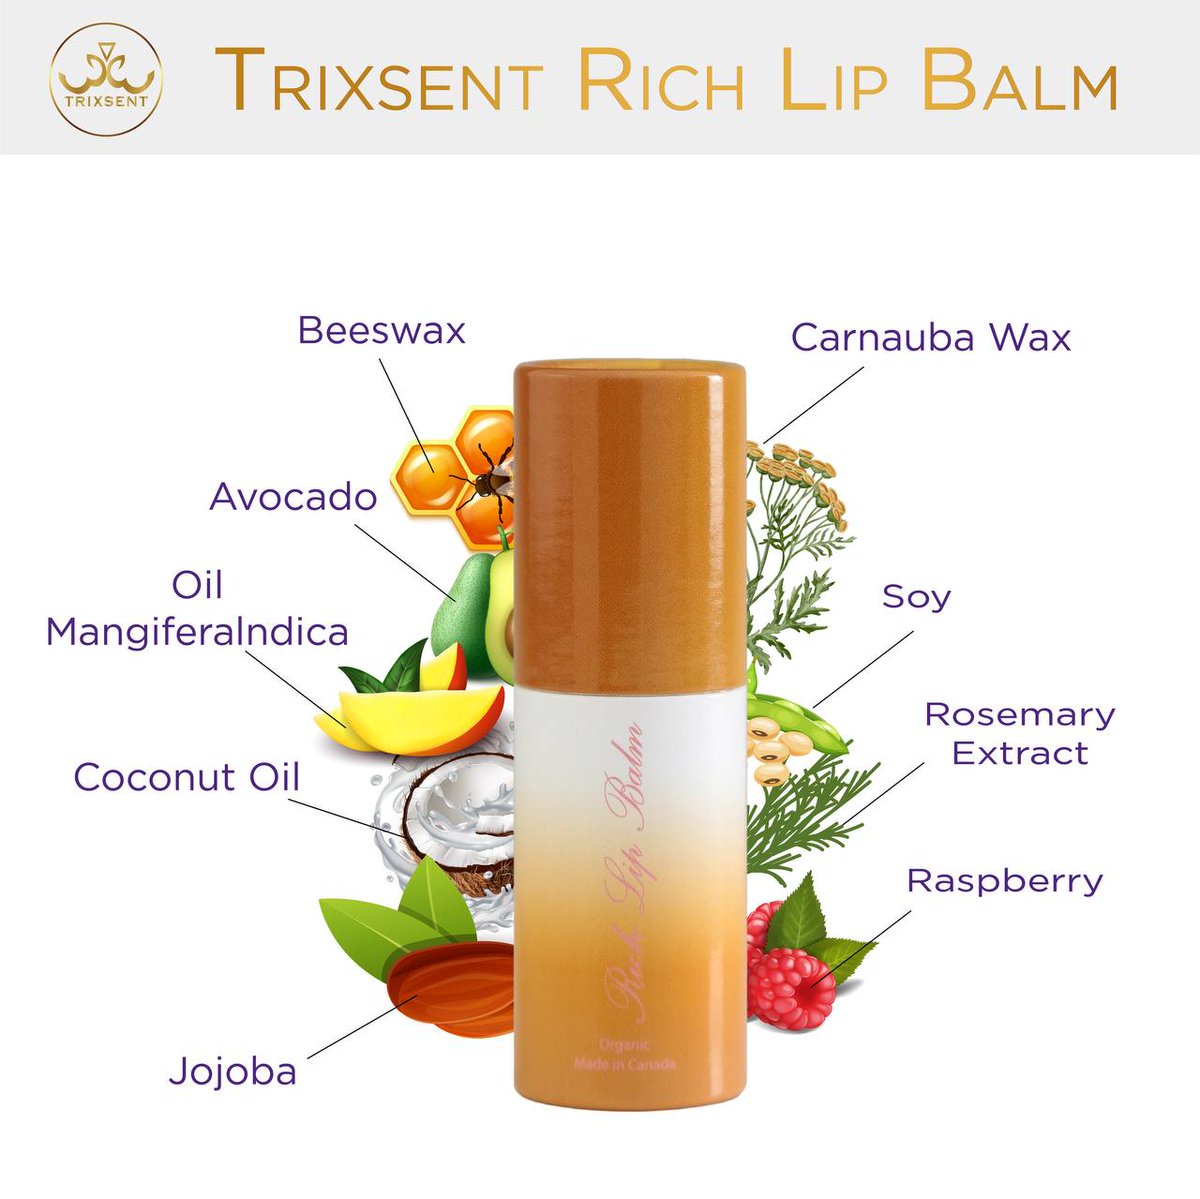 Pamper your lips with our luxurious Lip Balm, enriched with the finest coconut oil, jojoba, and other powerful ingredients. TRIXSENT assures not just deep hydration but also a collagen-boosting, protective shield for your lips. #lipcare #lipbalm #healthylips #skincare #liptherapy